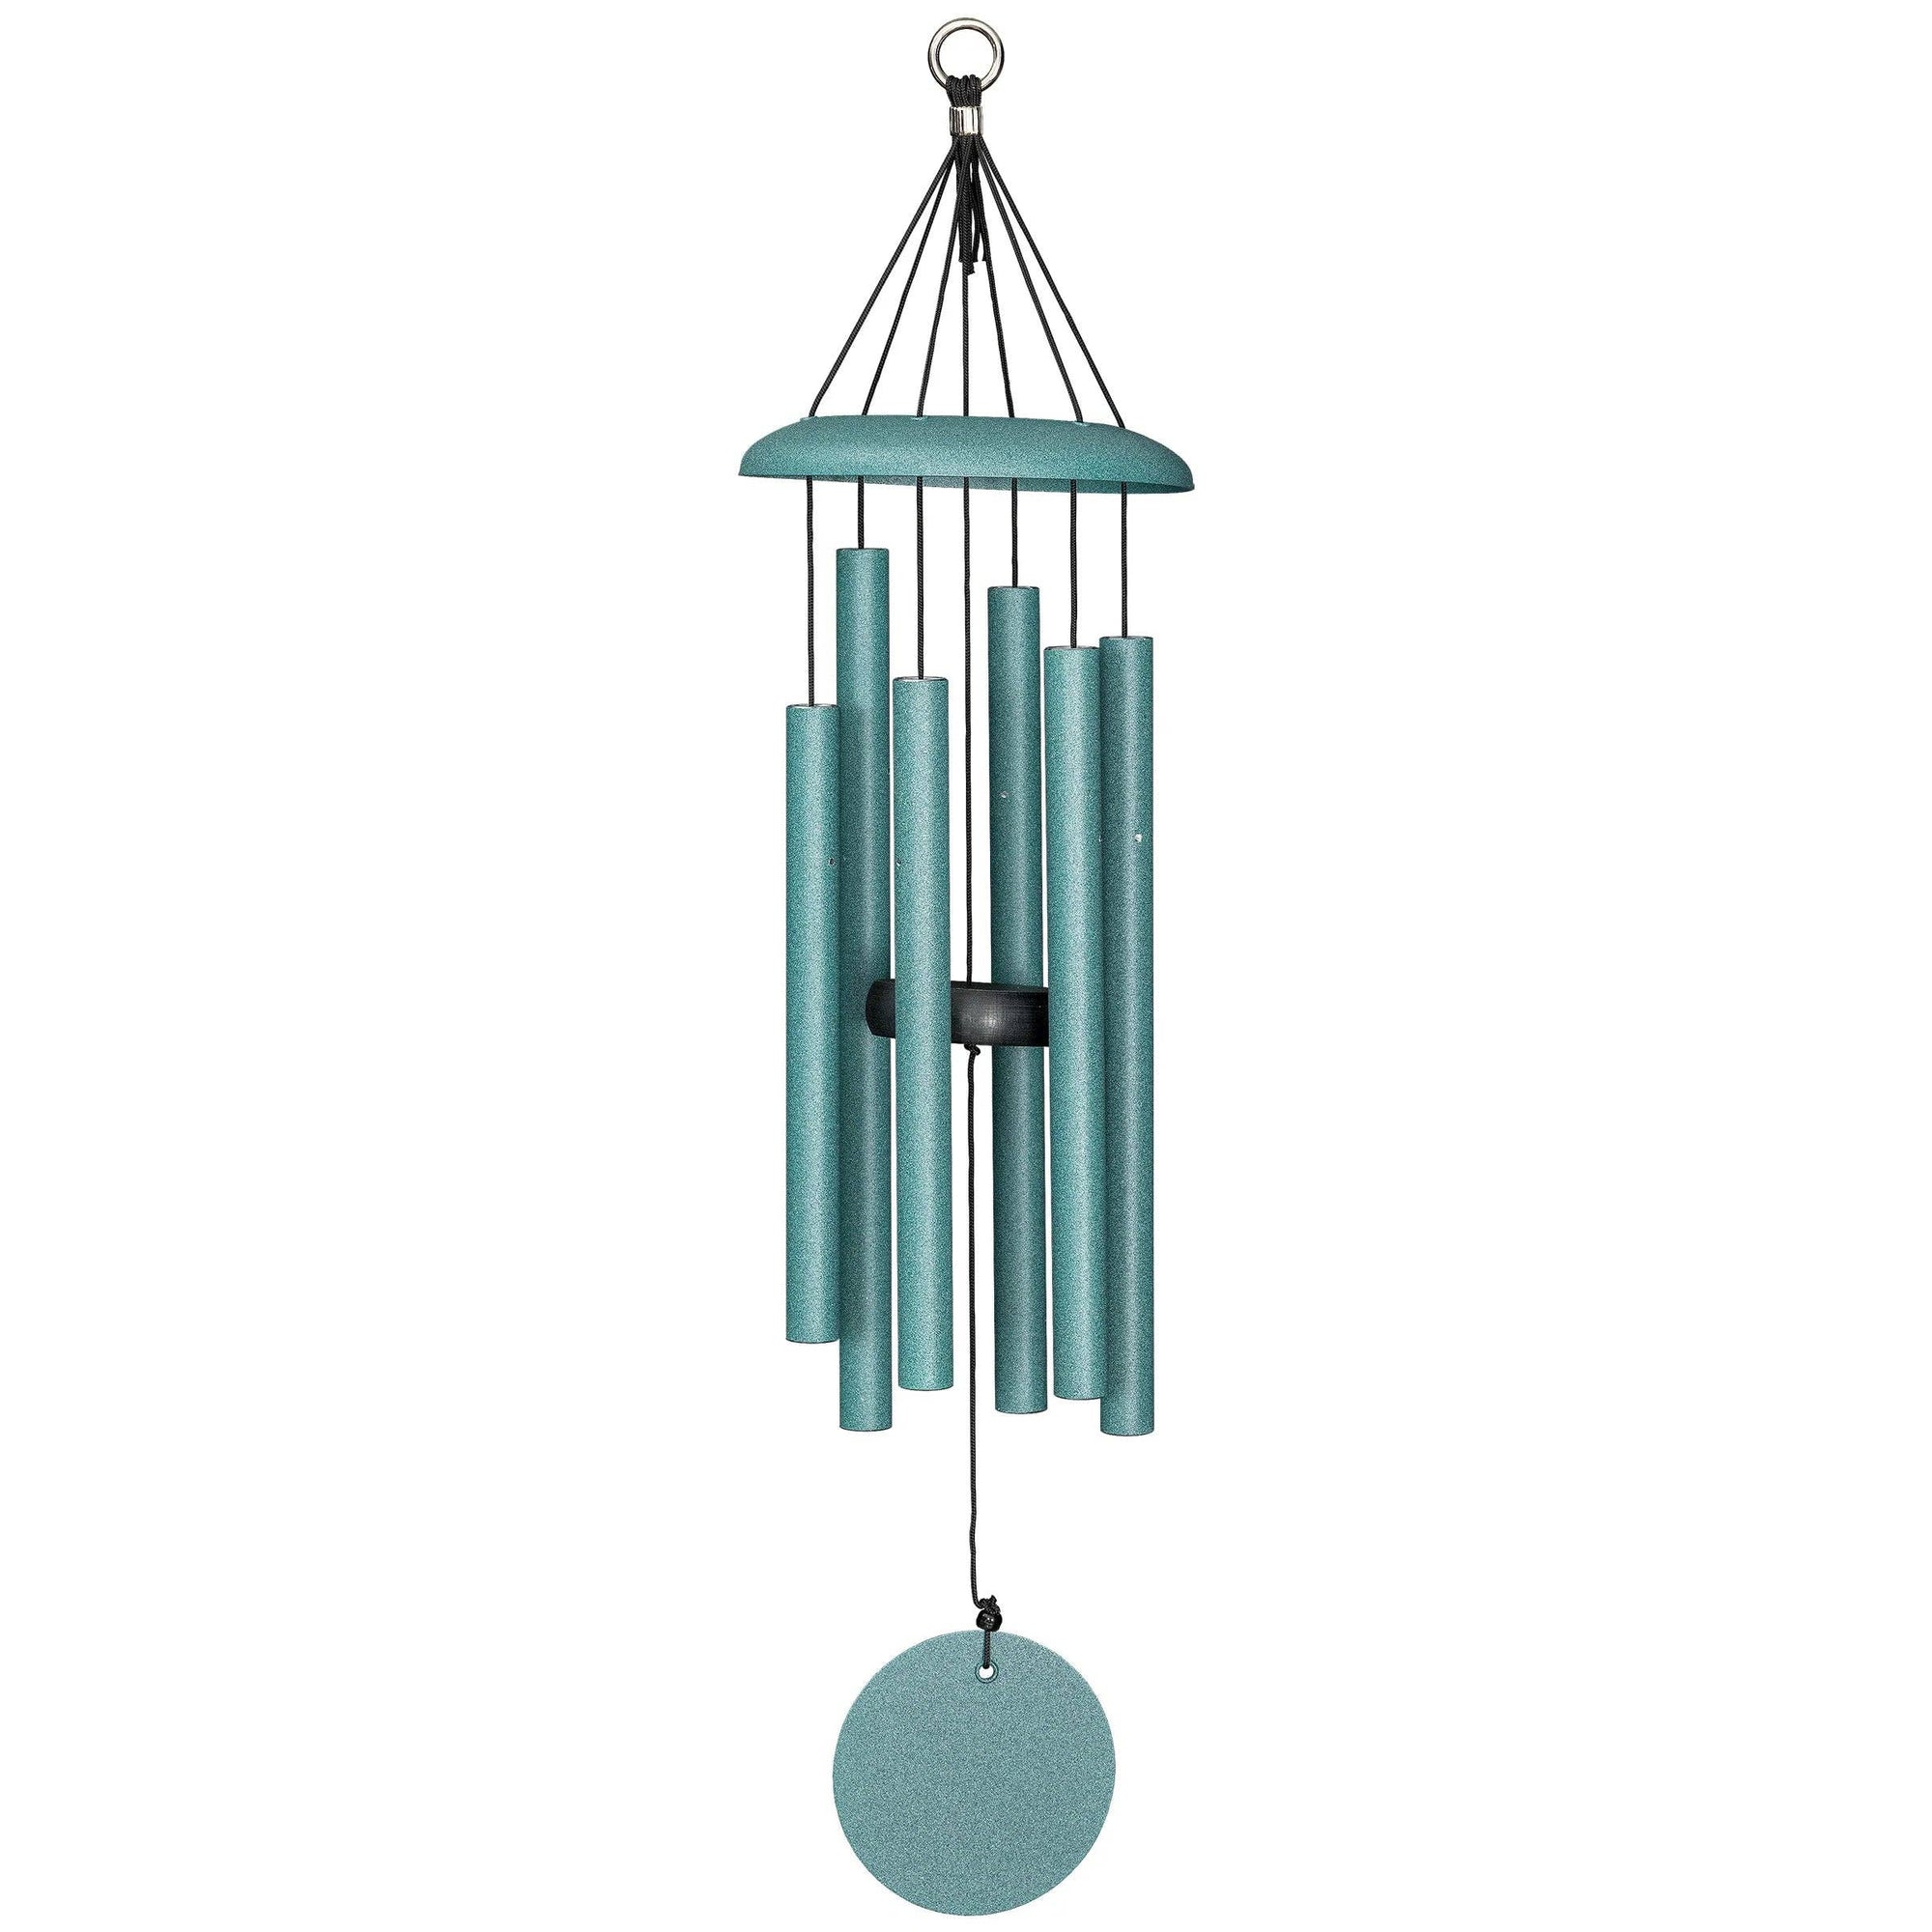 A budget-friendly 27" Windchime Corinthian Bells® adds a charming touch to any decor, hanging gracefully on a white background.